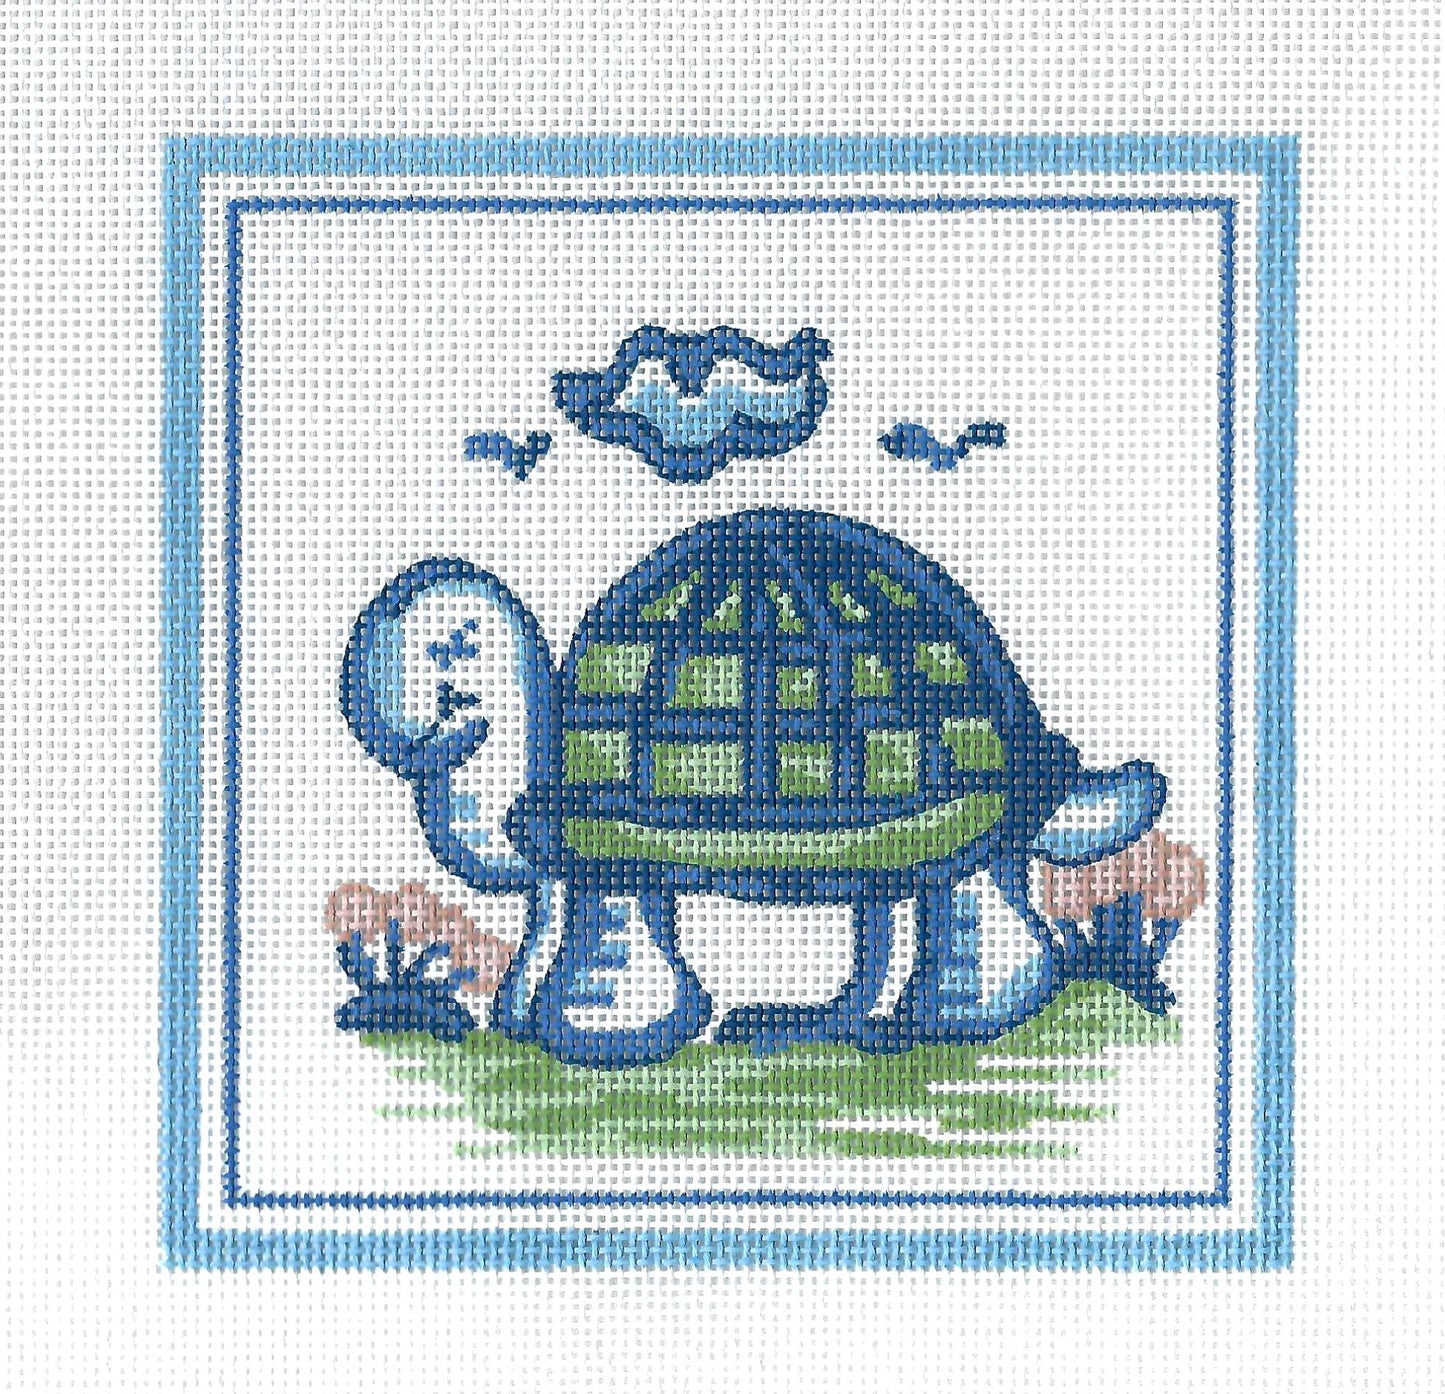 Hadley Pottery ~ TURTLE in a Summertime Field handpainted 5" SQ. Needlepoint Canvas by Silver Needle